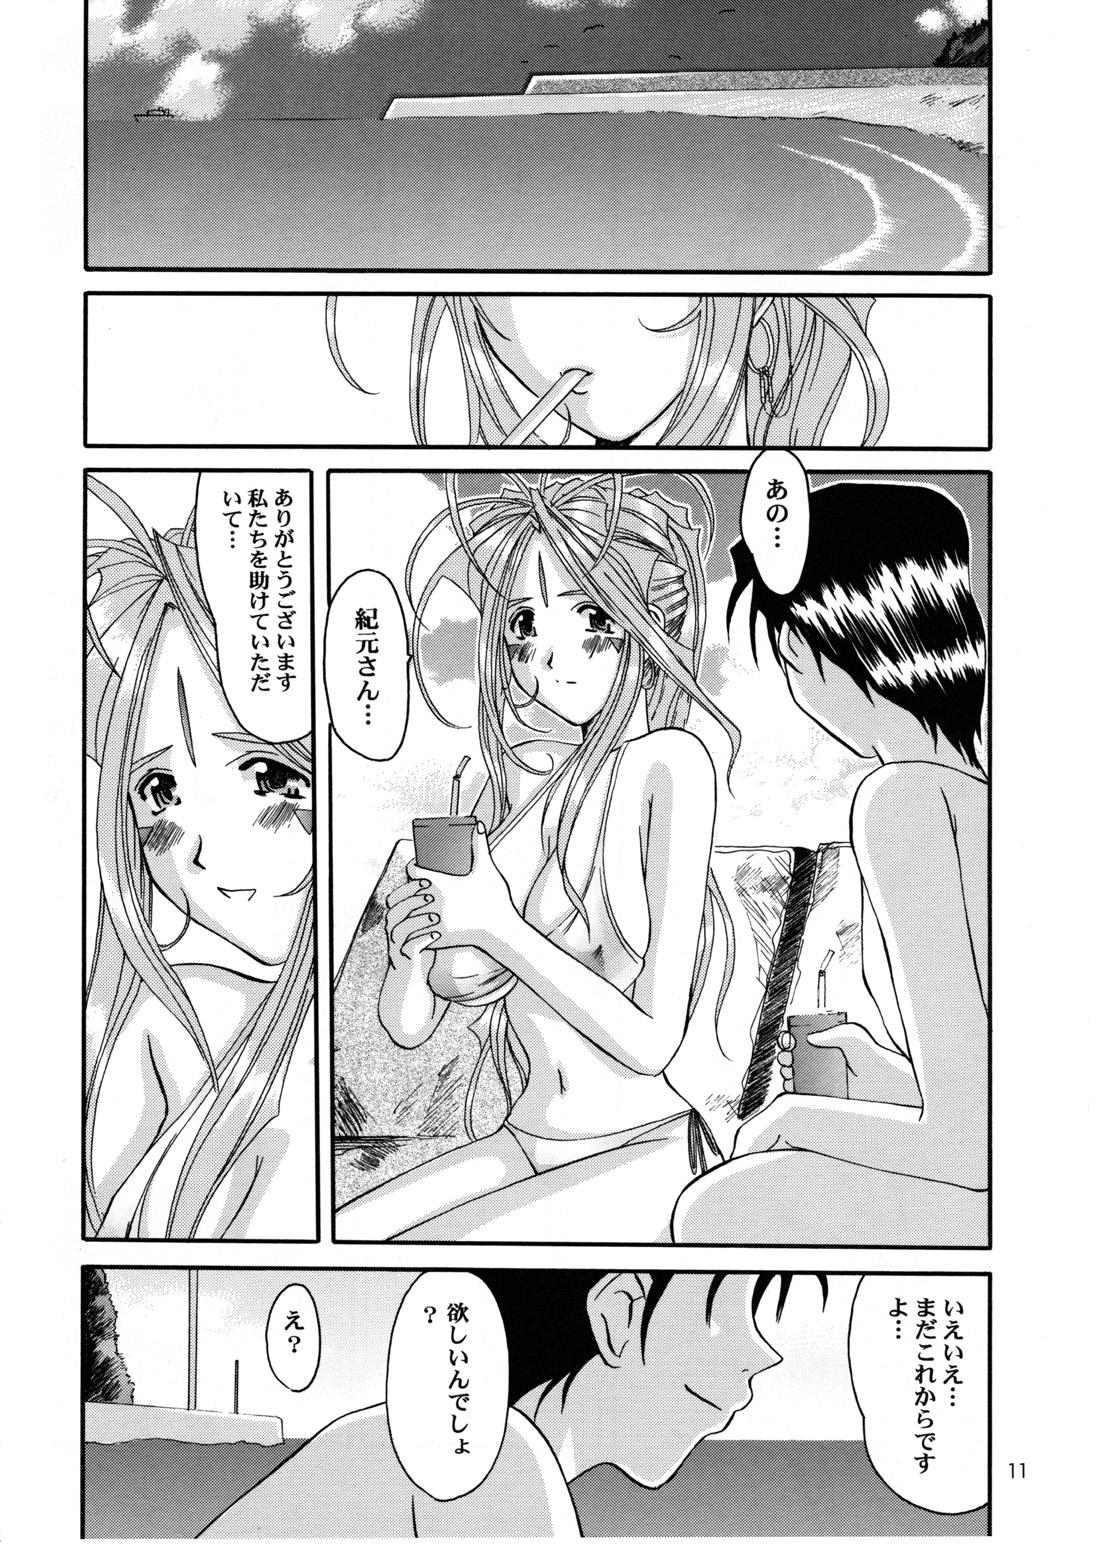 With Nightmare of My Goddess Summer Interval - Ah my goddess Gay Blowjob - Page 11